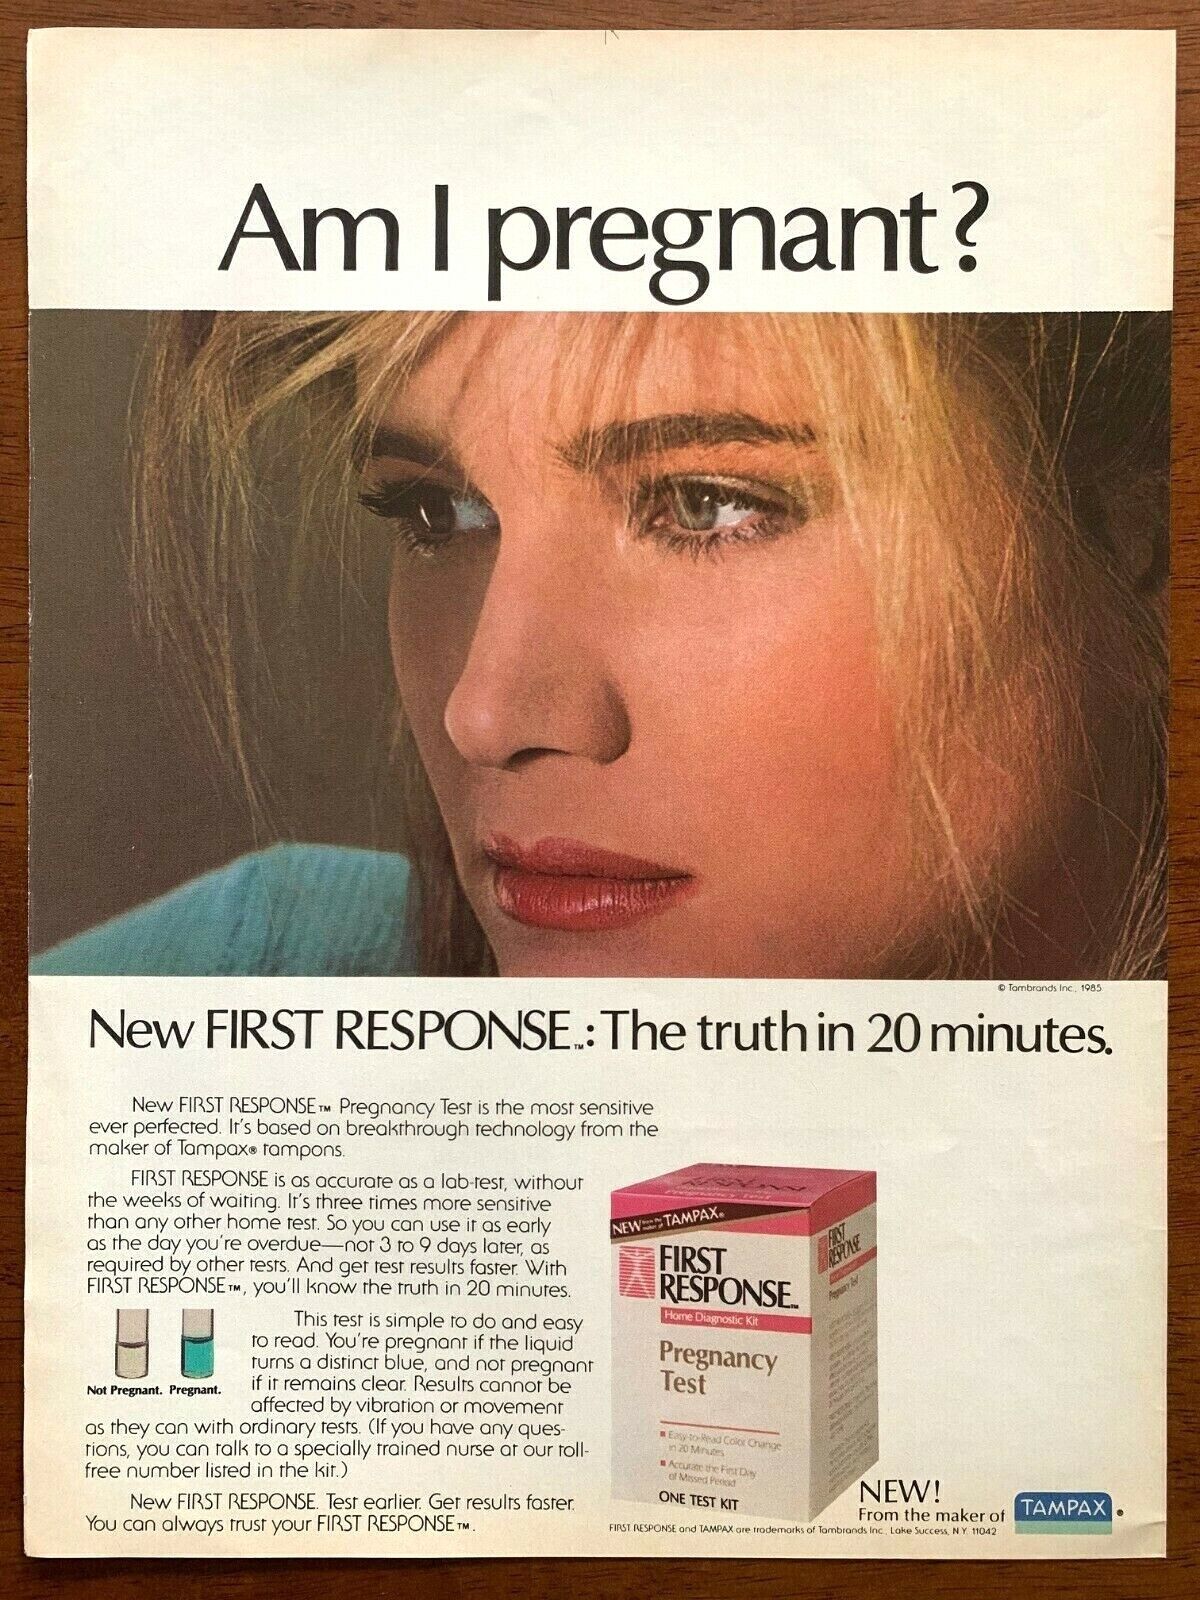 1985 Tampax First Response Pregnancy Test Vintage Print Ad/Poster 80s Art Décor 